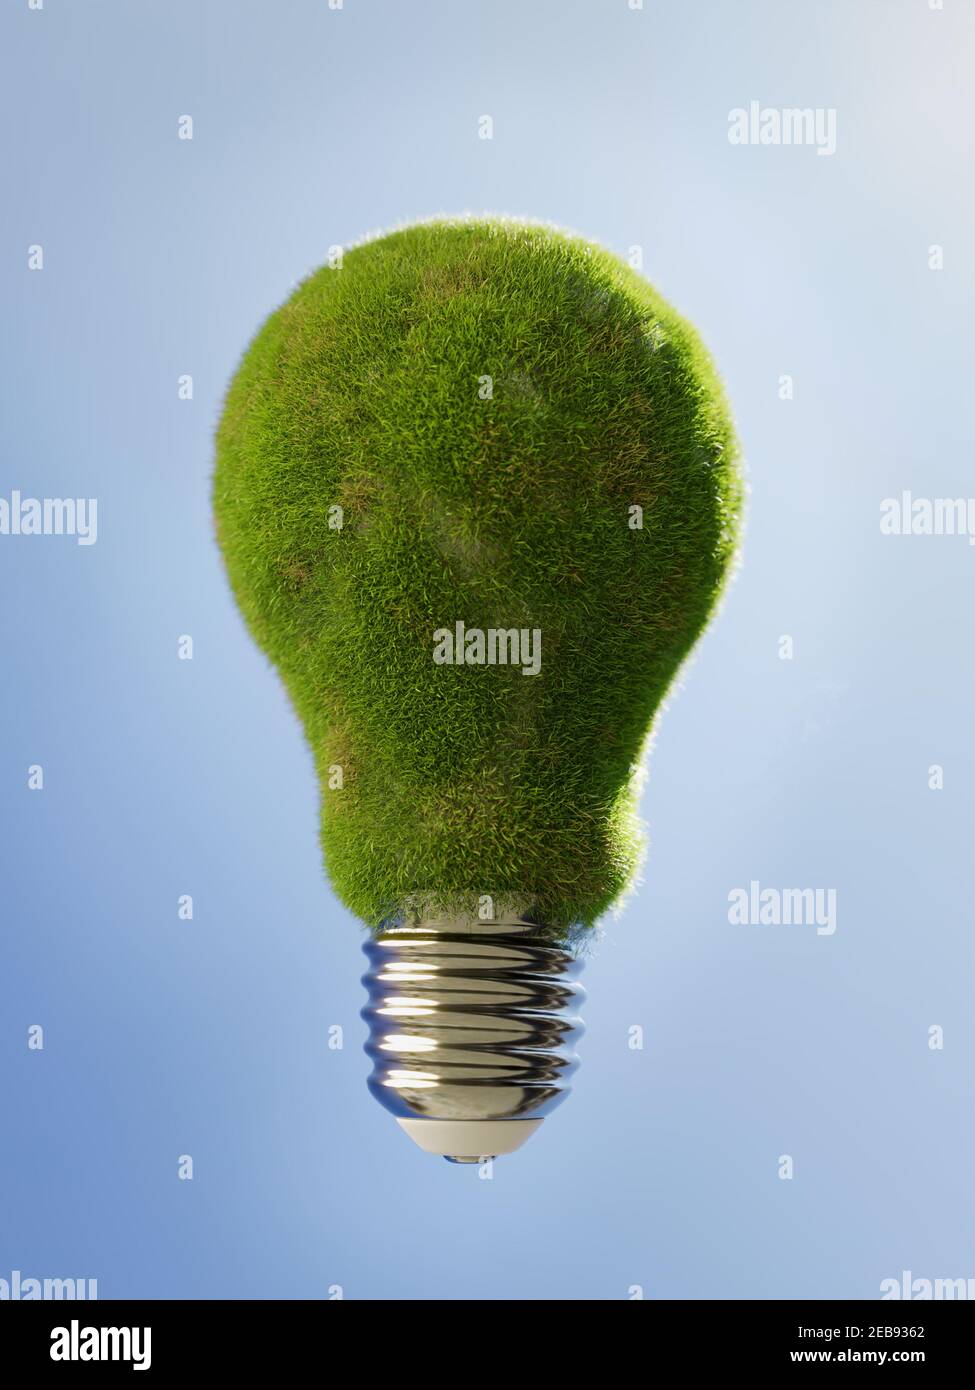 3D rendering of lightbulb with glass part covered with green grass against blue sky Stock Photo